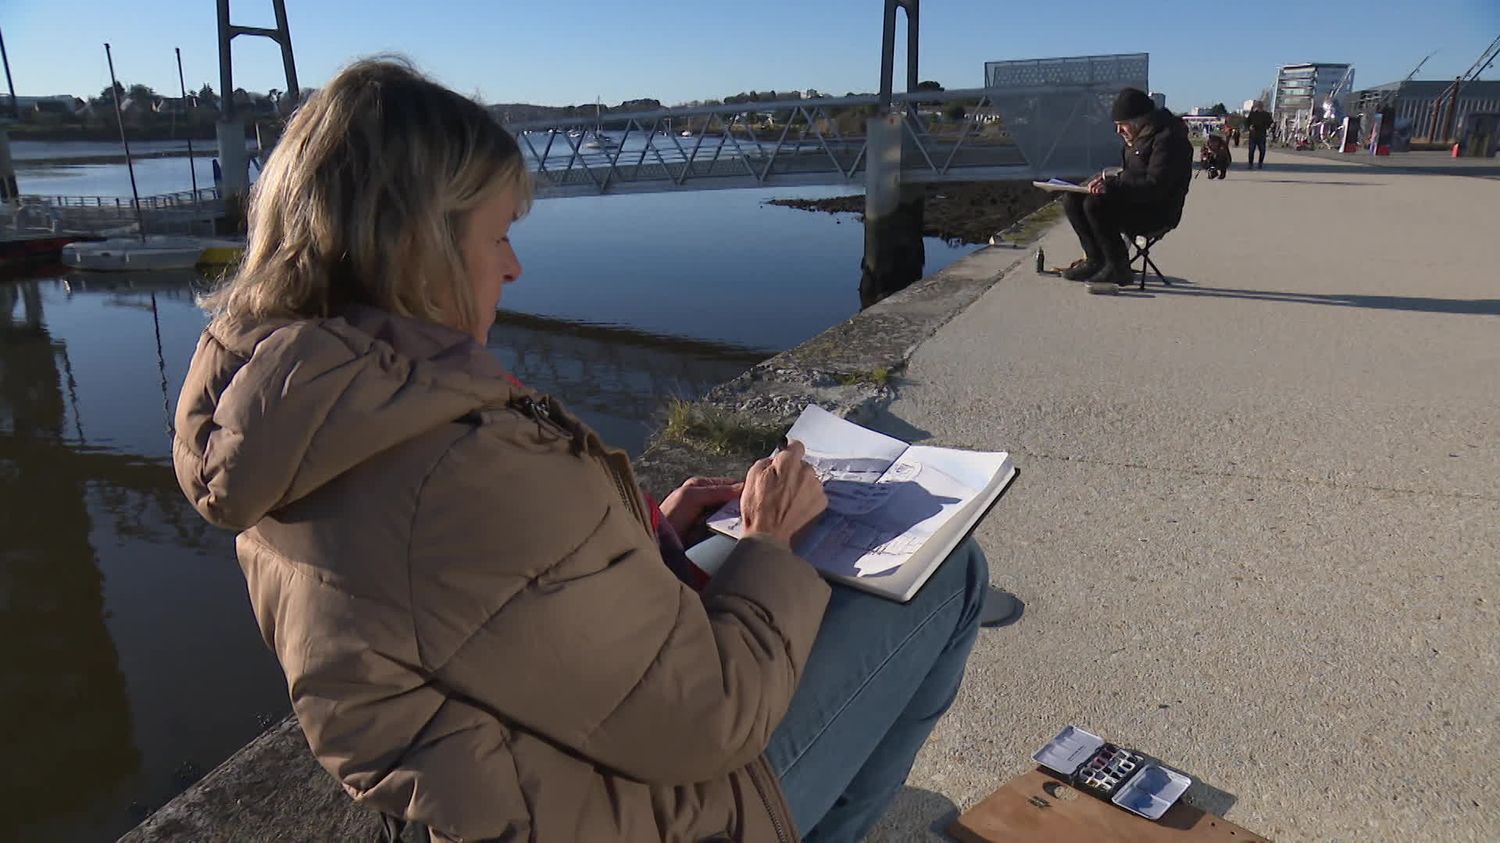 "Urban Sketchers", a new American trend emerging in Lorient